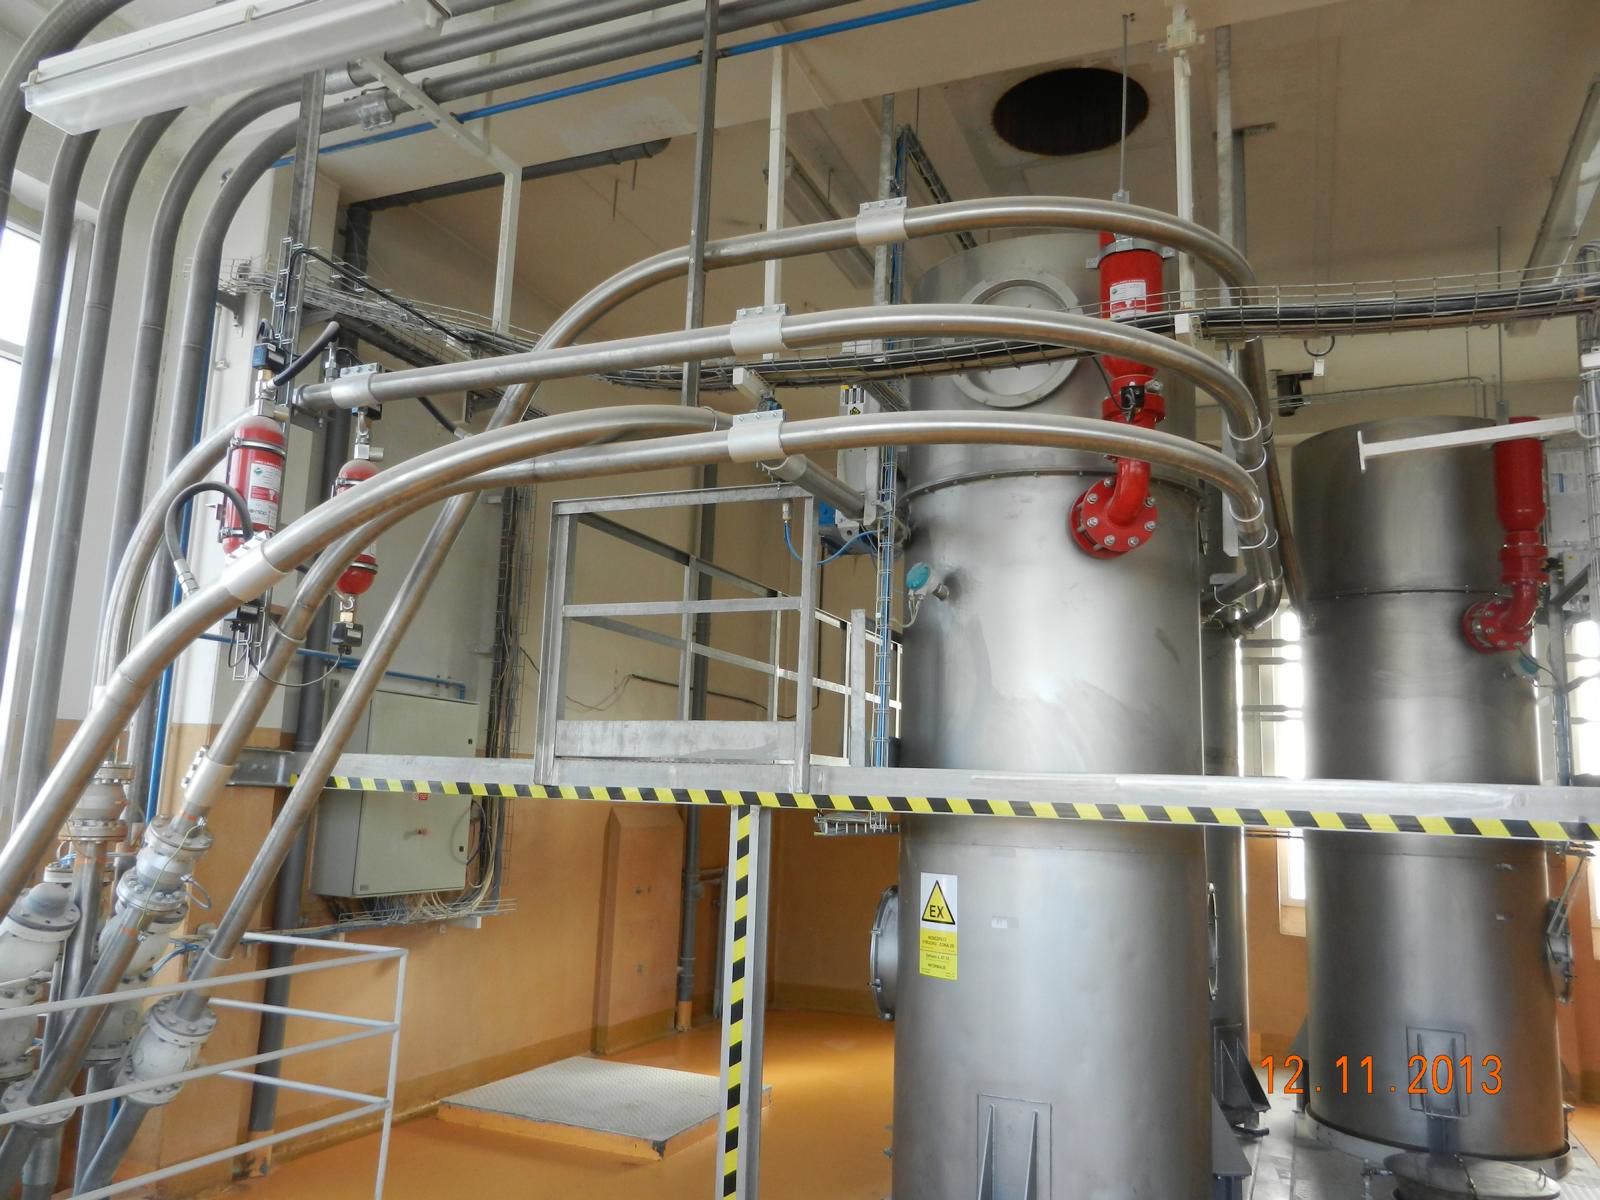 Turnkey explosion protection system for chemical and pharmaceutical production facilities